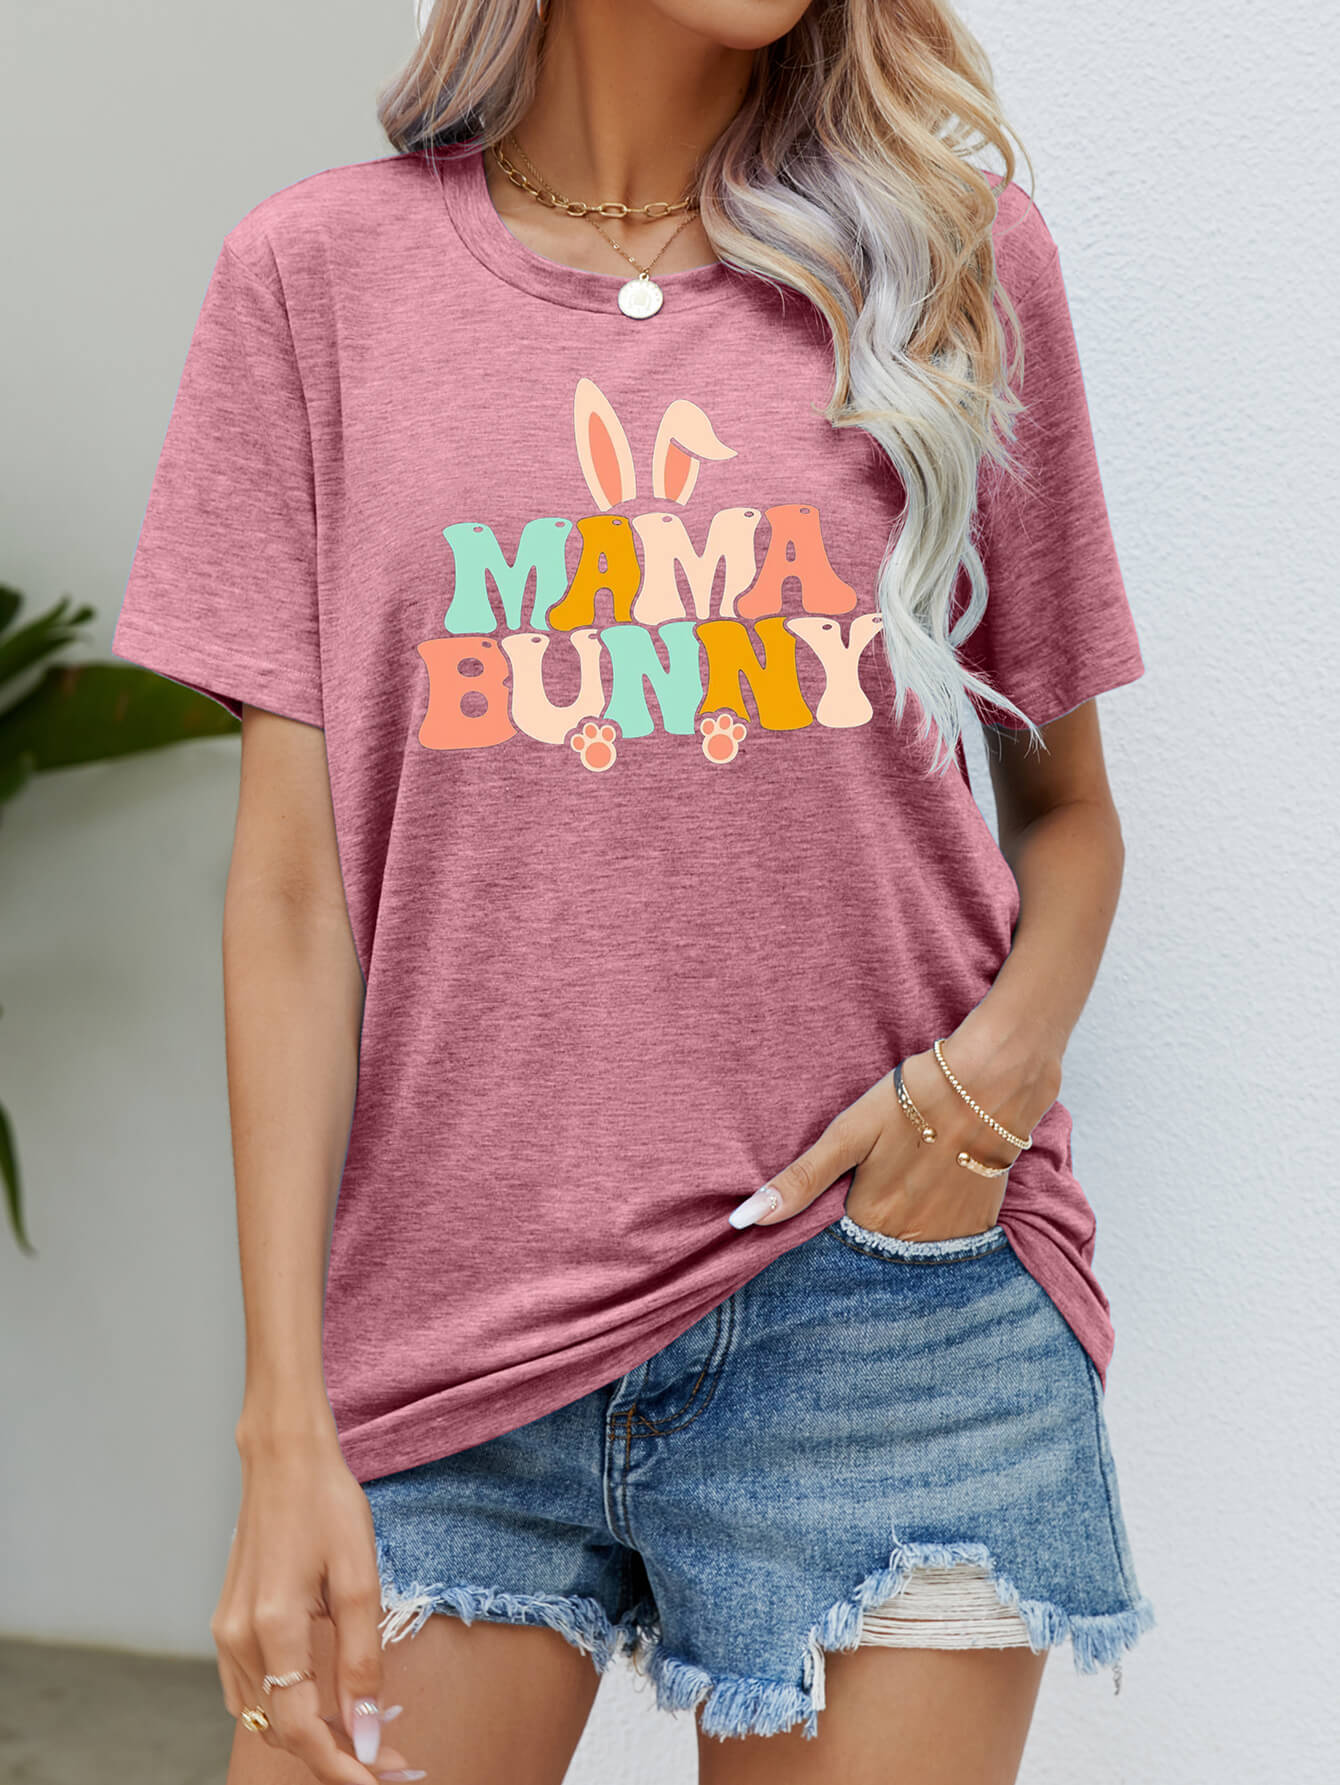 Easter MAMA BUNNY Tee Shirt BLUE ZONE PLANET